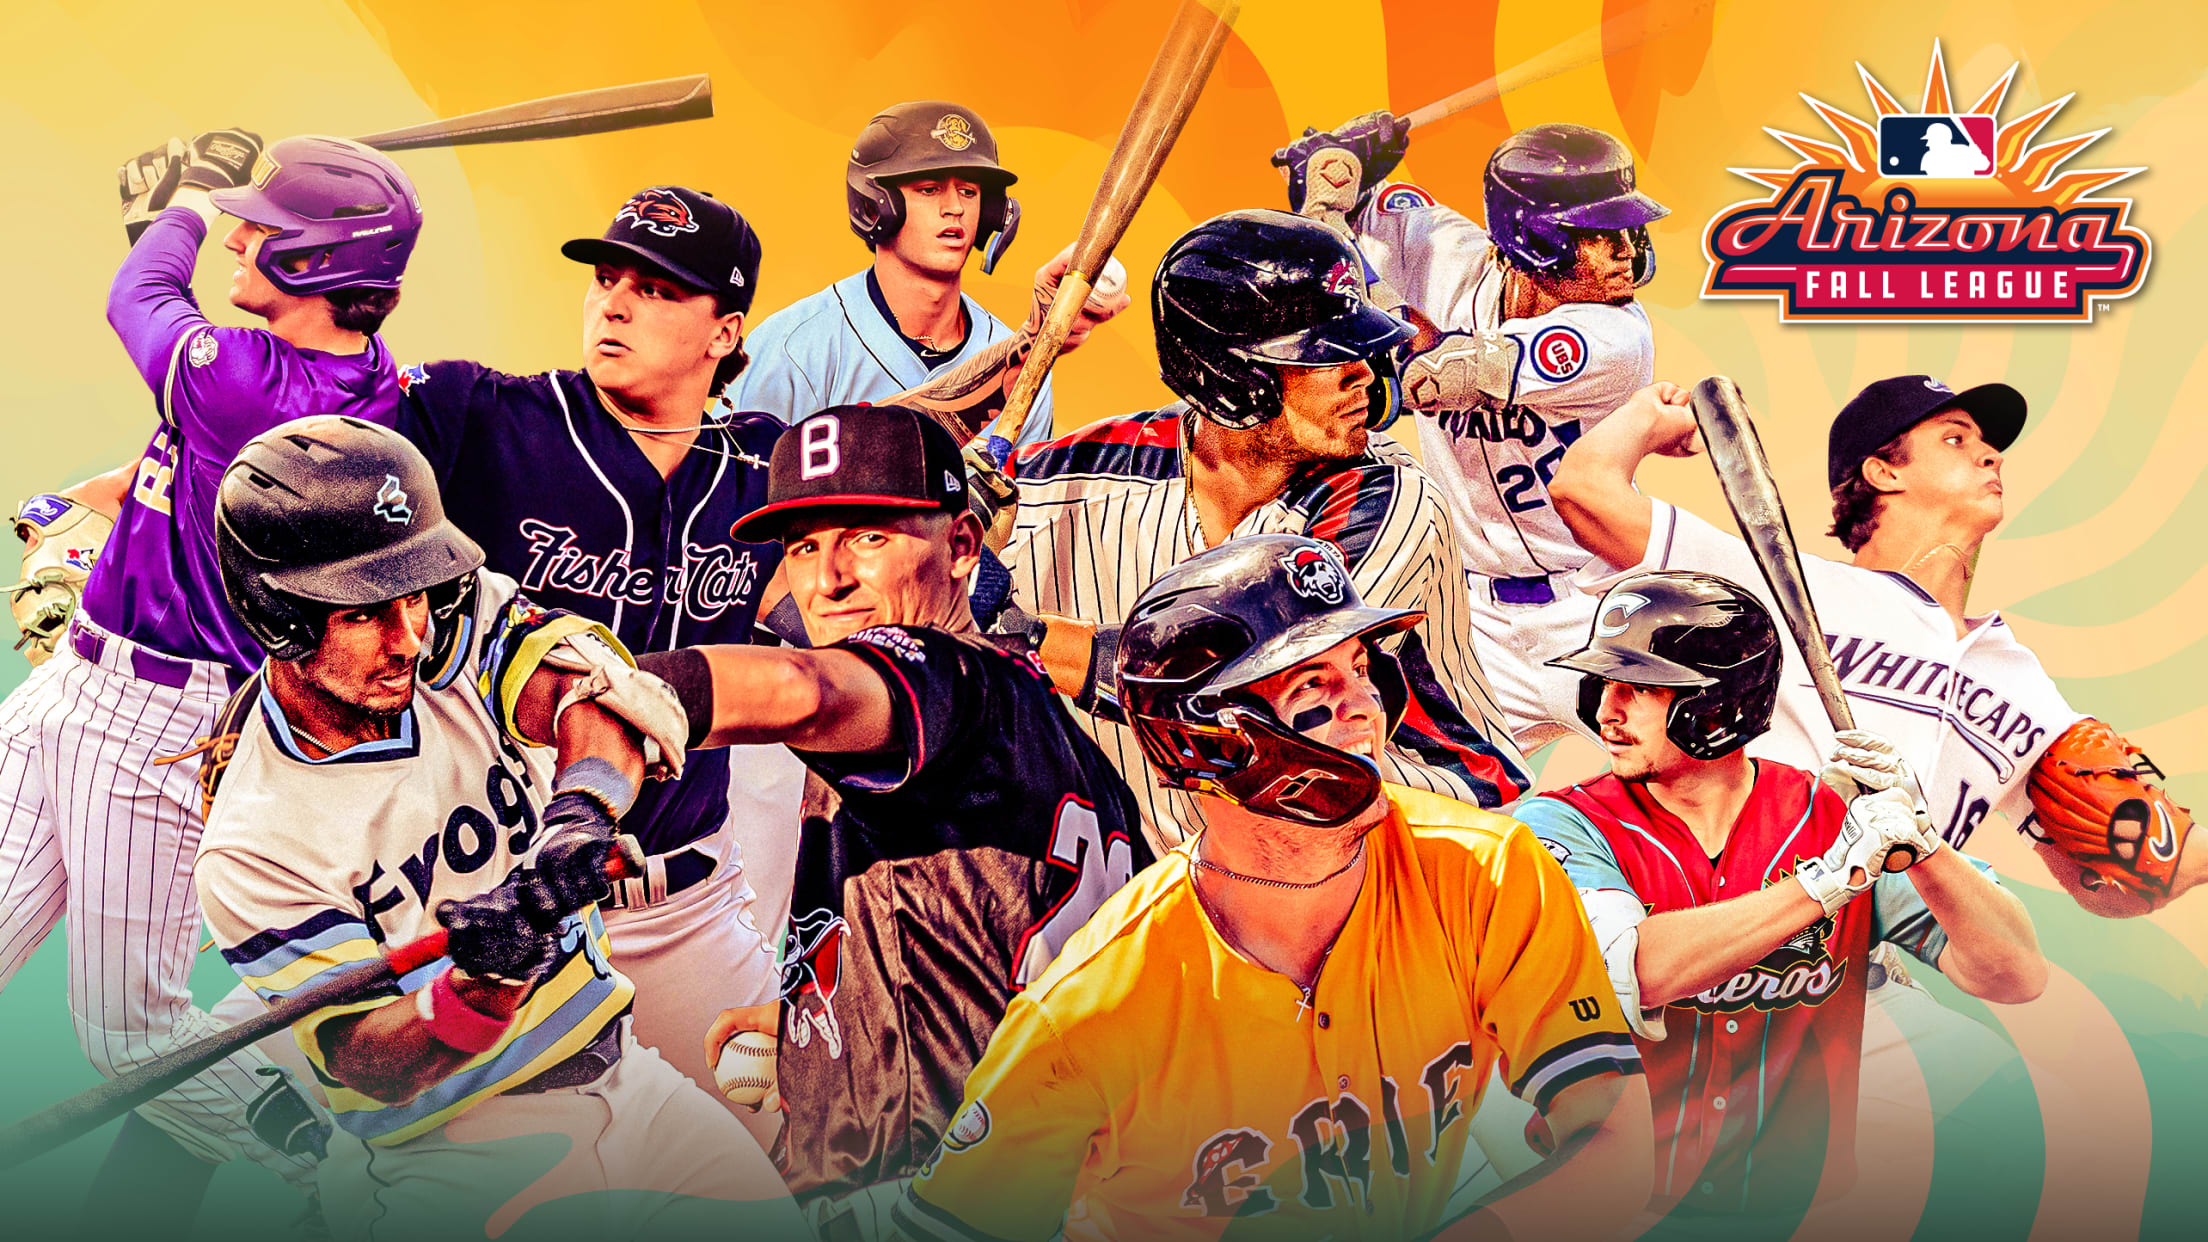 A photo illustration of 10 top prospects